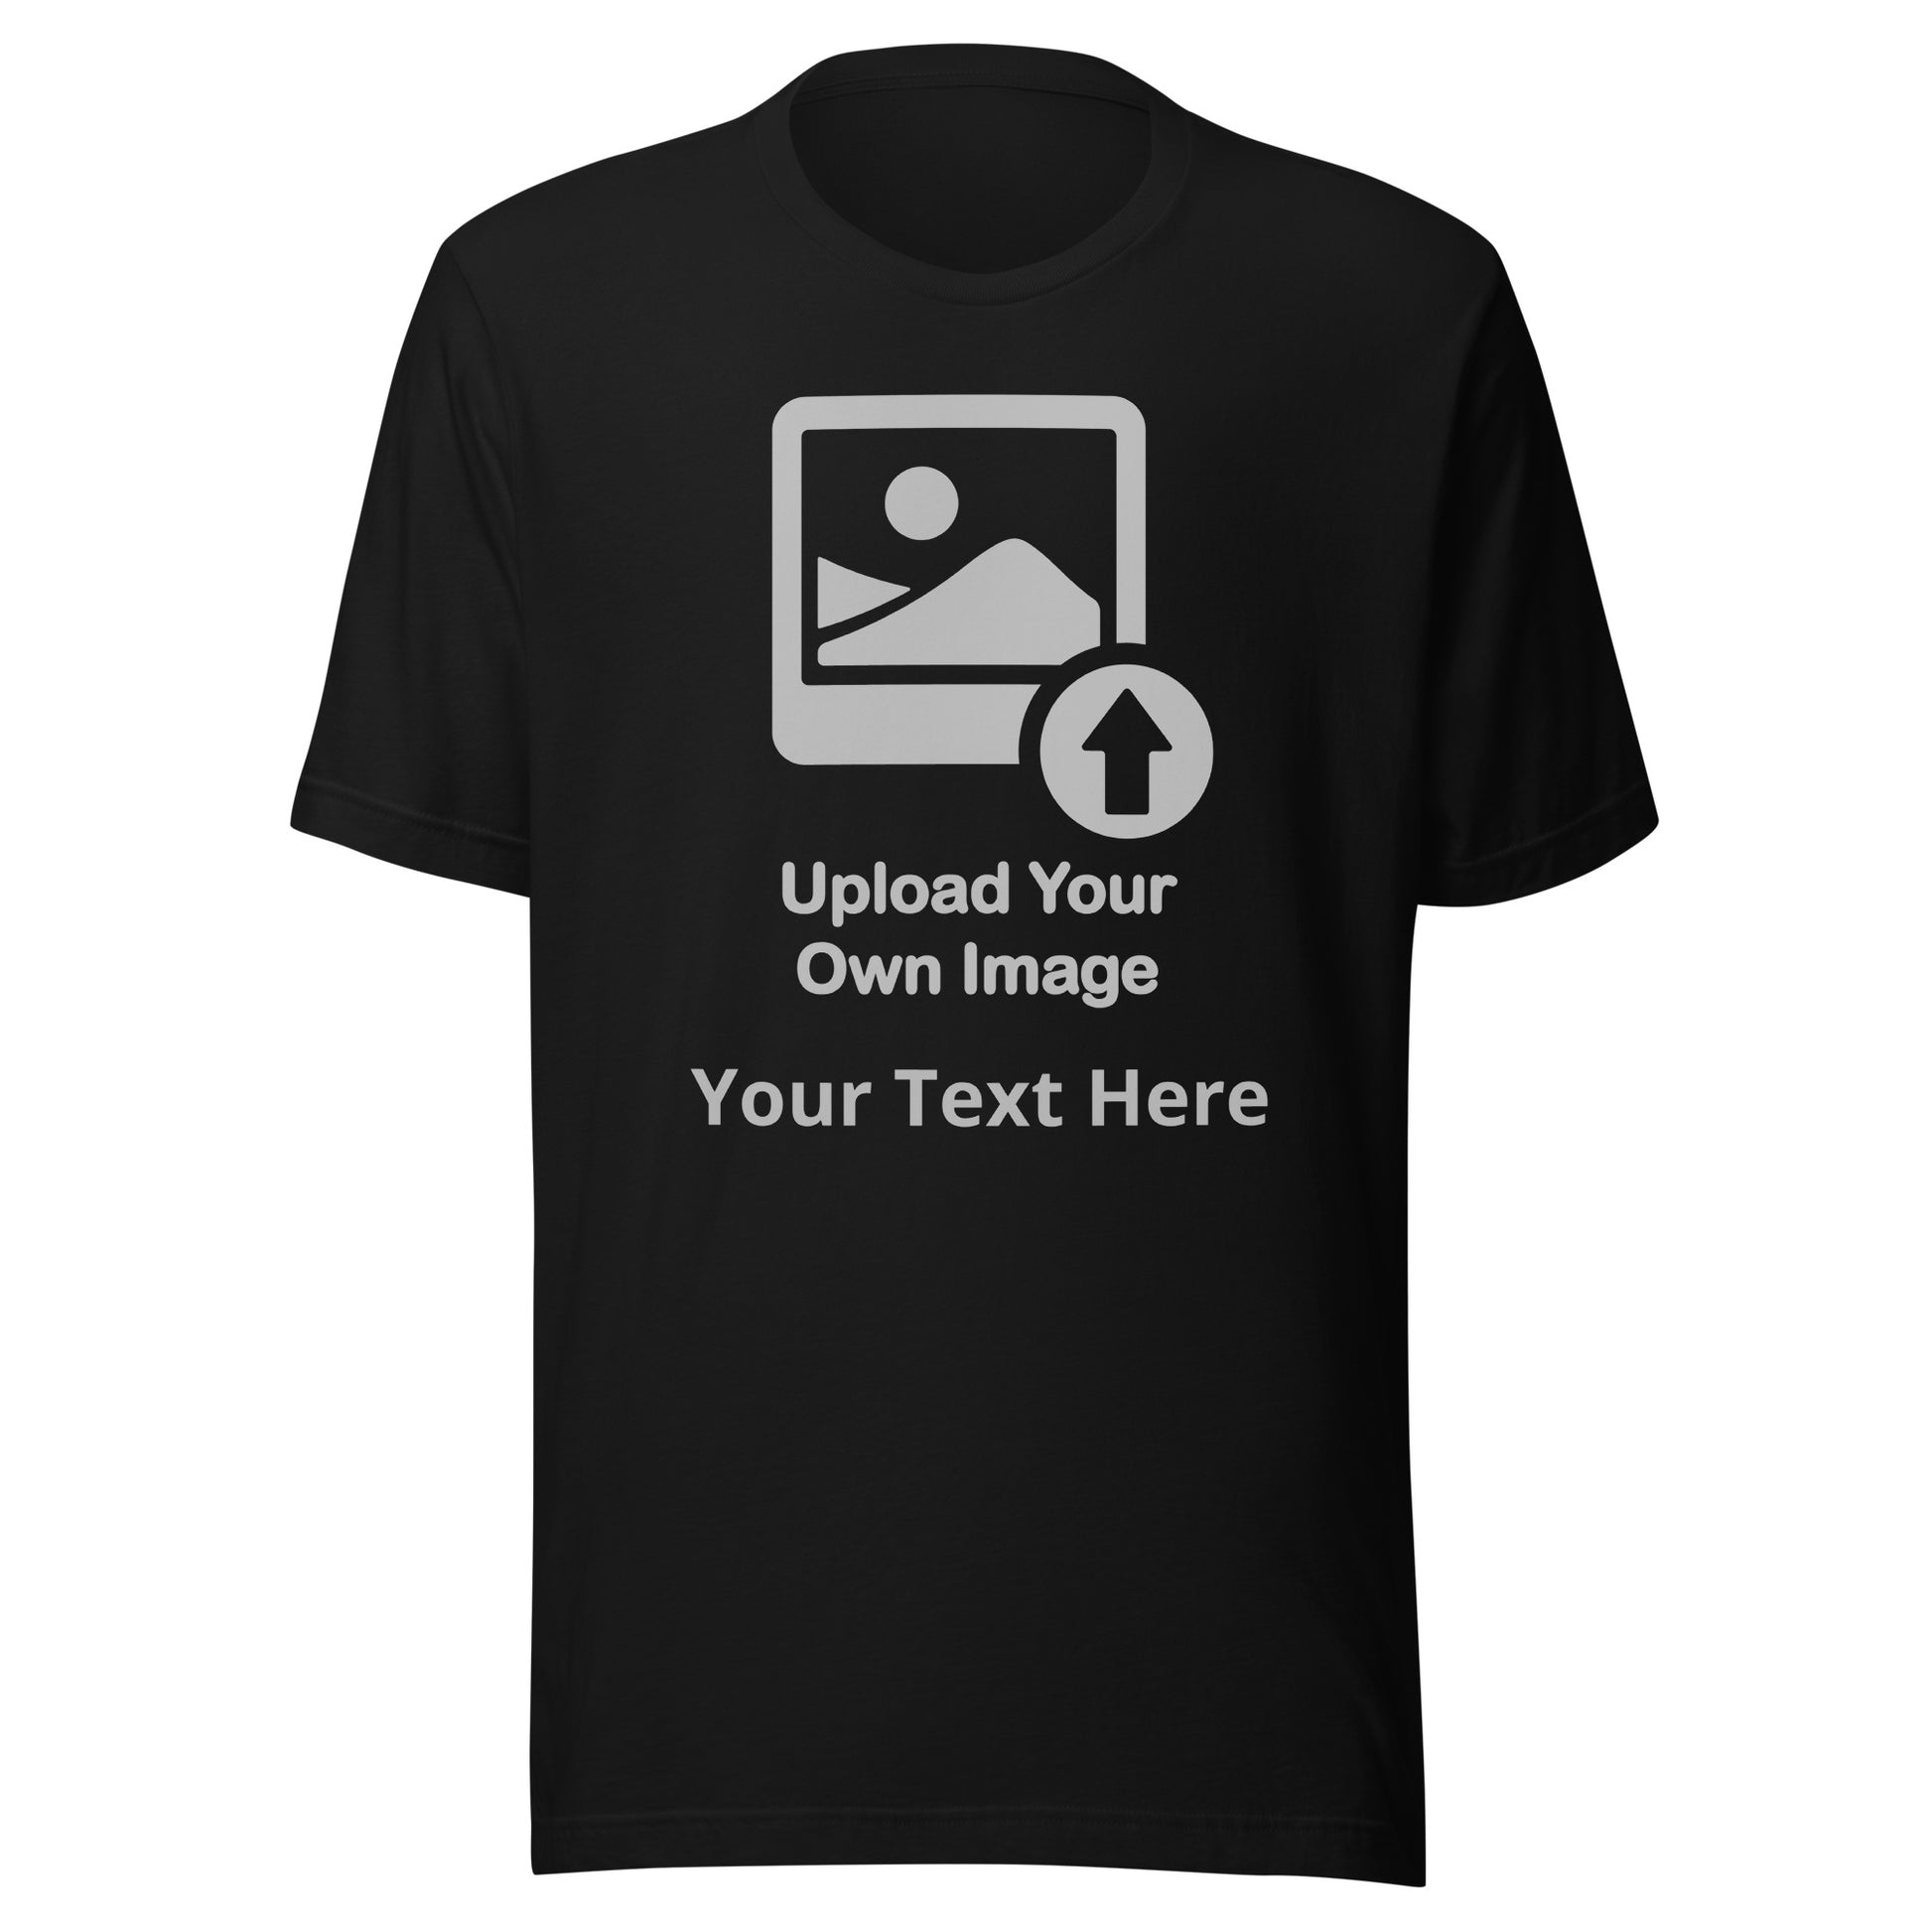 Why can't I upload shirts, did they make it so you have to have